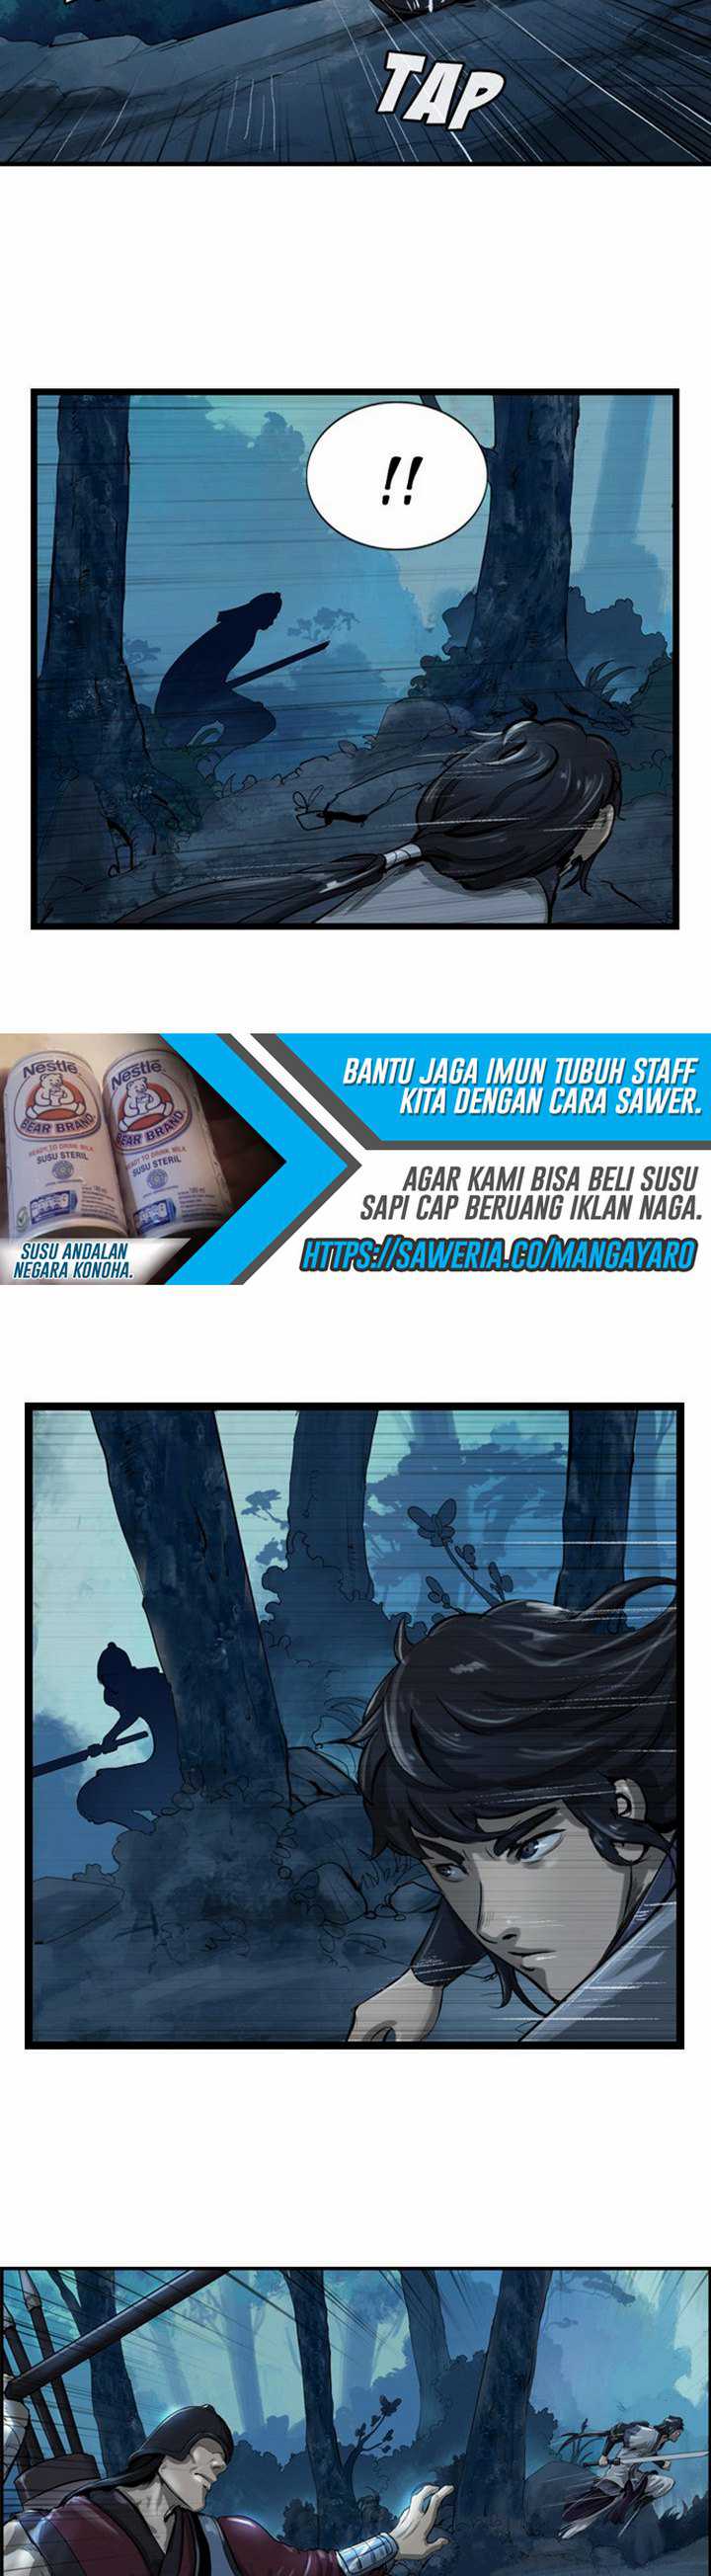 The Wanderer Chapter 21.2 bahasa indonesia